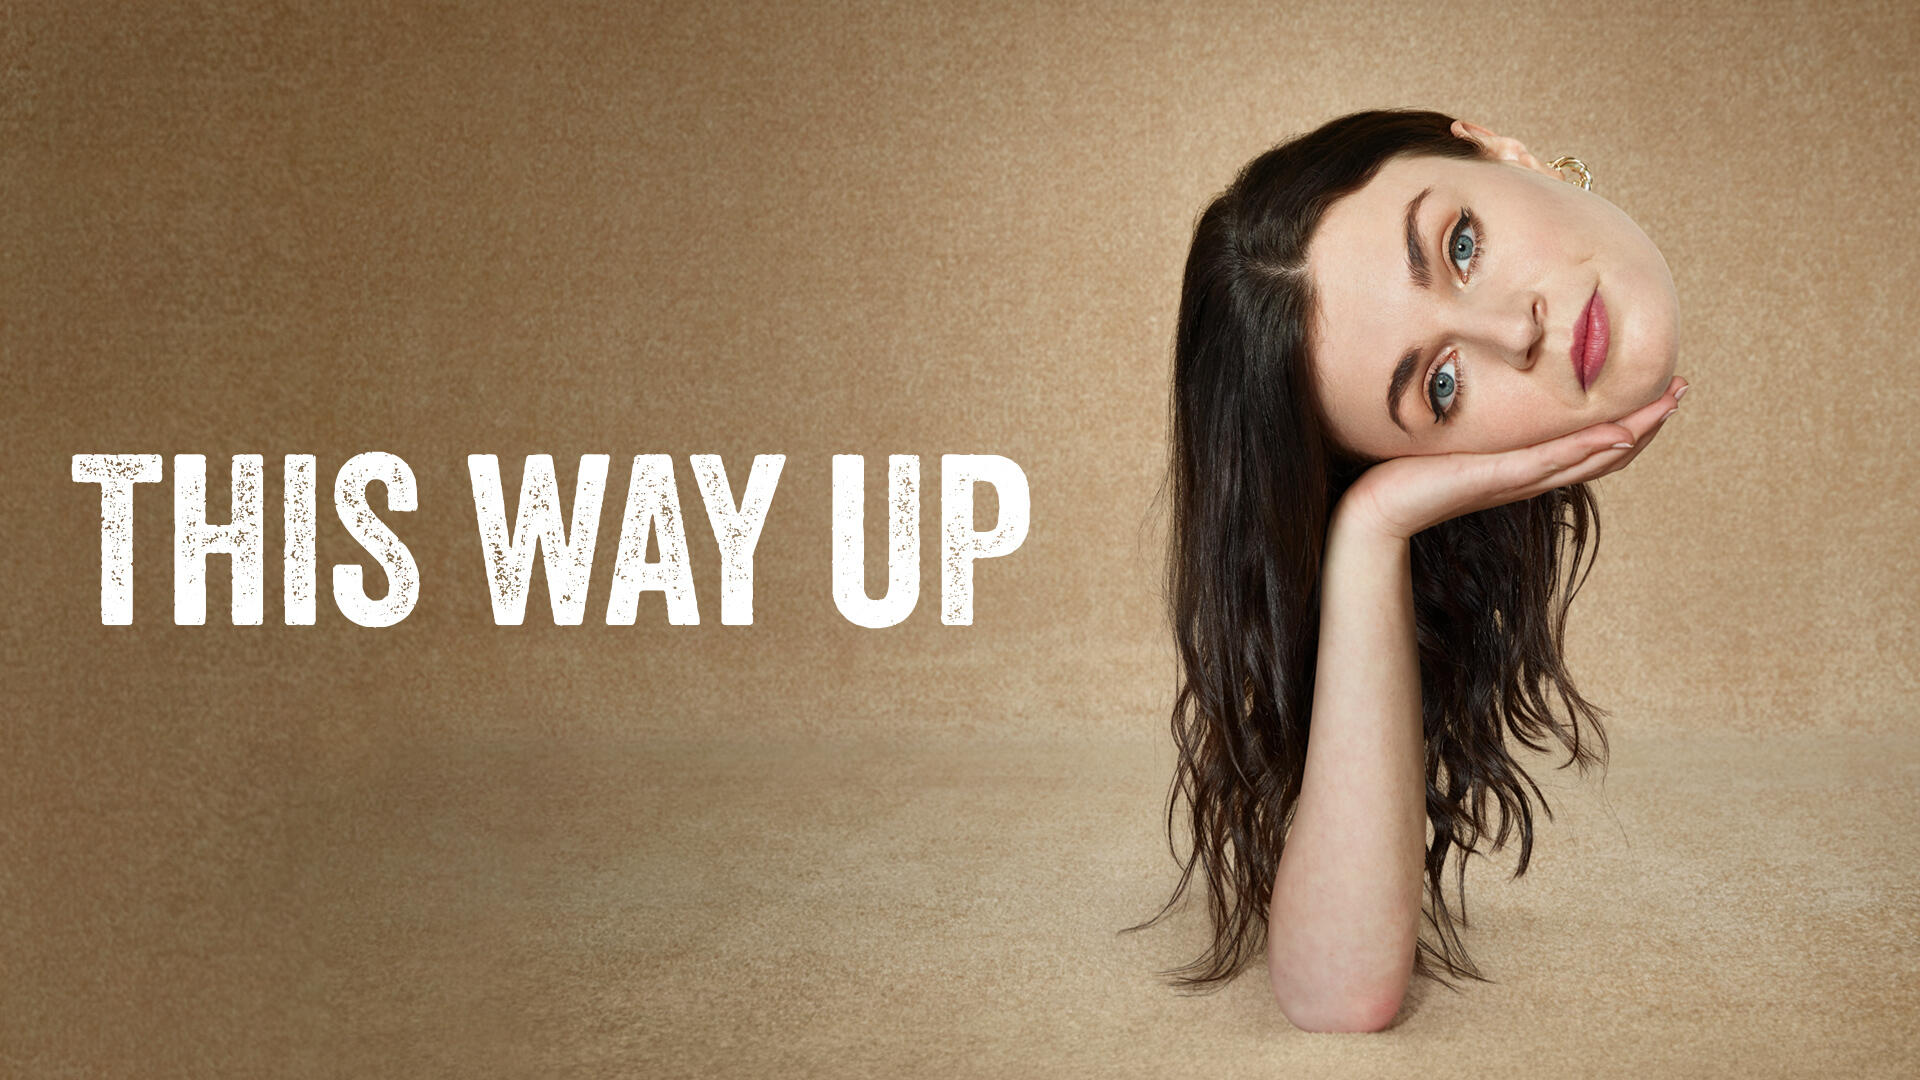 This Way Up -- Season two of the BAFTA award-winning series is set after the events of the season one finale, with things in flux for Aine (Aisling Bea, “Living With Yourself;” “Quiz”) and her sister, Shona (Sharon Horgan, “Catastrophe;” “Military Wives”). Aine’s starting to leave her time in rehab behind and live less cautiously, which may not be entirely wise. Will she and Richard (Tobias Menzies, “The Crown;” “Game of Thrones”) make a go of it? Or continue to exist in the odd tension of the employer and employee? How will Shona and Charlotte (Indira Varma, “Game of Thrones;” “Luther”) manage running a new business together and having feelings for each other? Will Shona be able to go through with marrying Vish (Aasif Mandvi, “Evil;” “The Brink”)? Planning a wedding? Can she tell him what happened? Is there anything more to tell? Aisling Bea, shown. (Courtesy of Hulu)